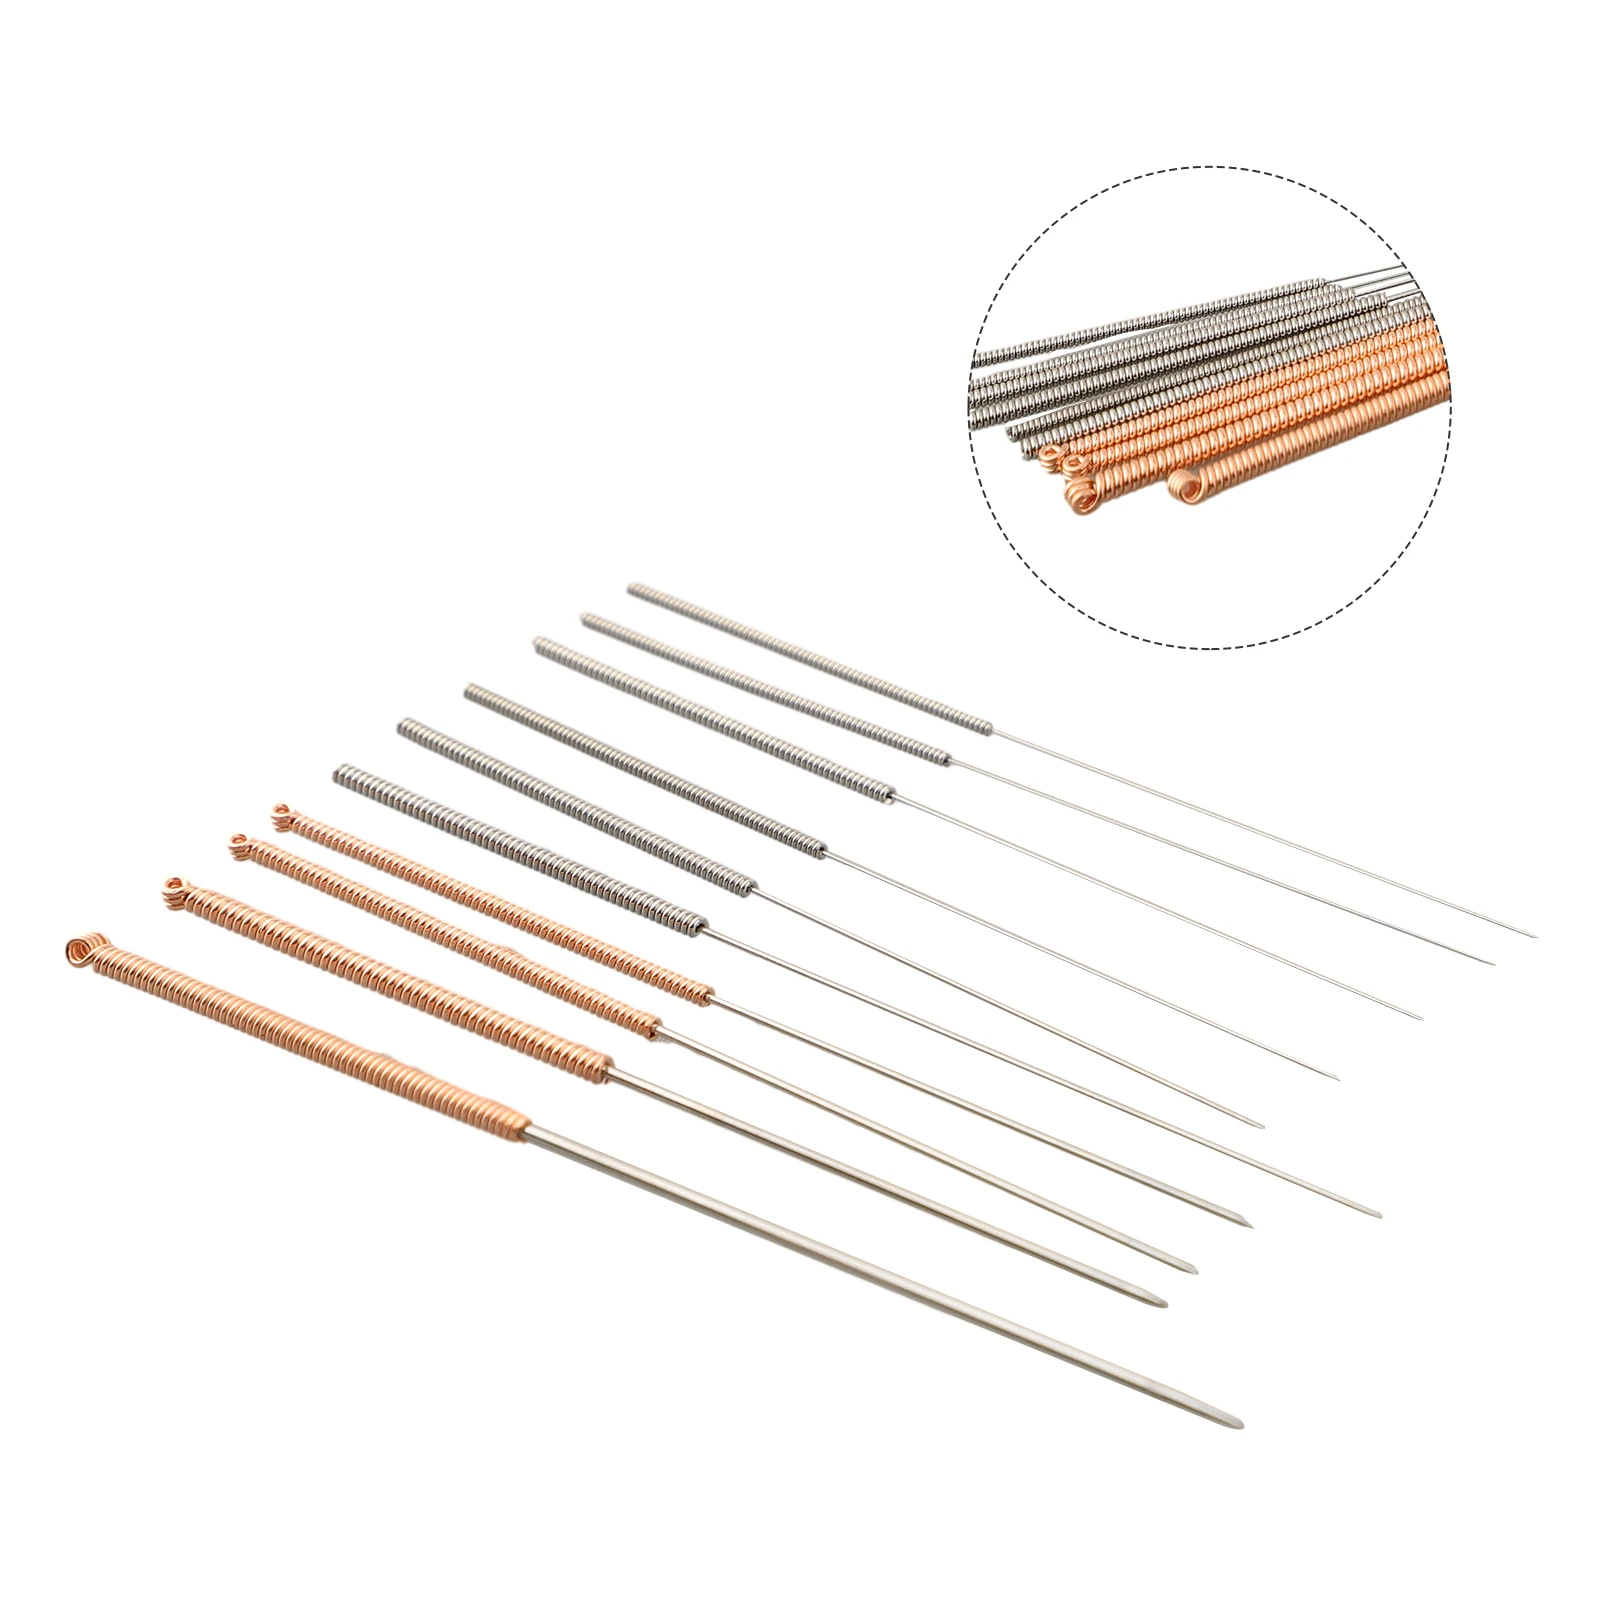 10pcs Cleaning Needles 0.15-1.0mm Nozzle Clean Needle High Elasticity MK8 Nozles For cleaning filament remaining inside nozzles